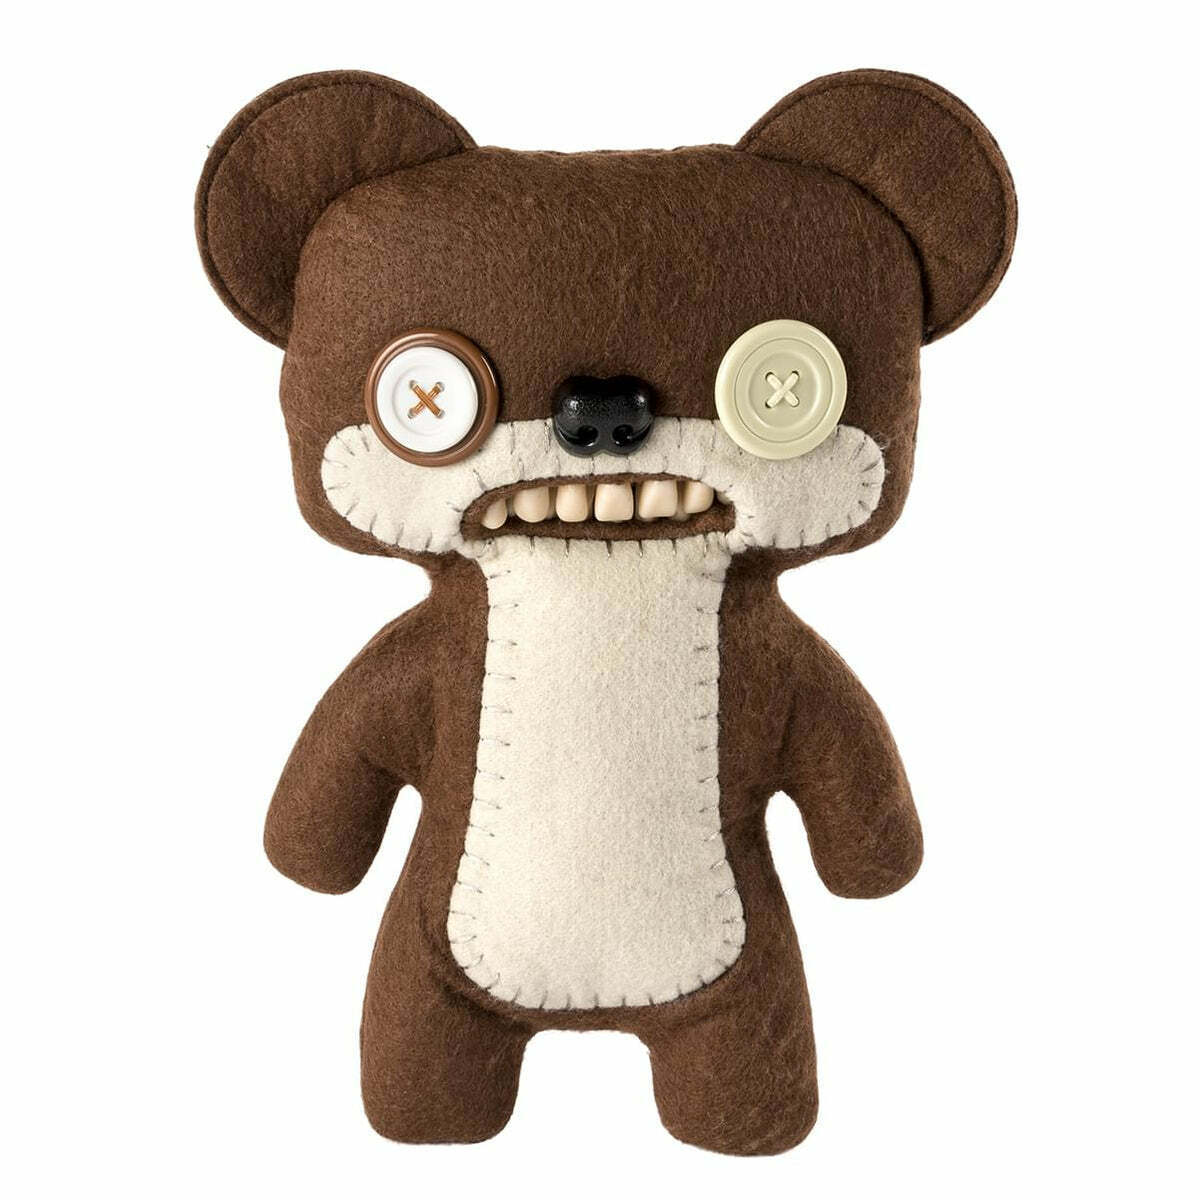 Fuggler - Rare Teddy Bear Nightmare Brown Plush Spin Master Discontinued